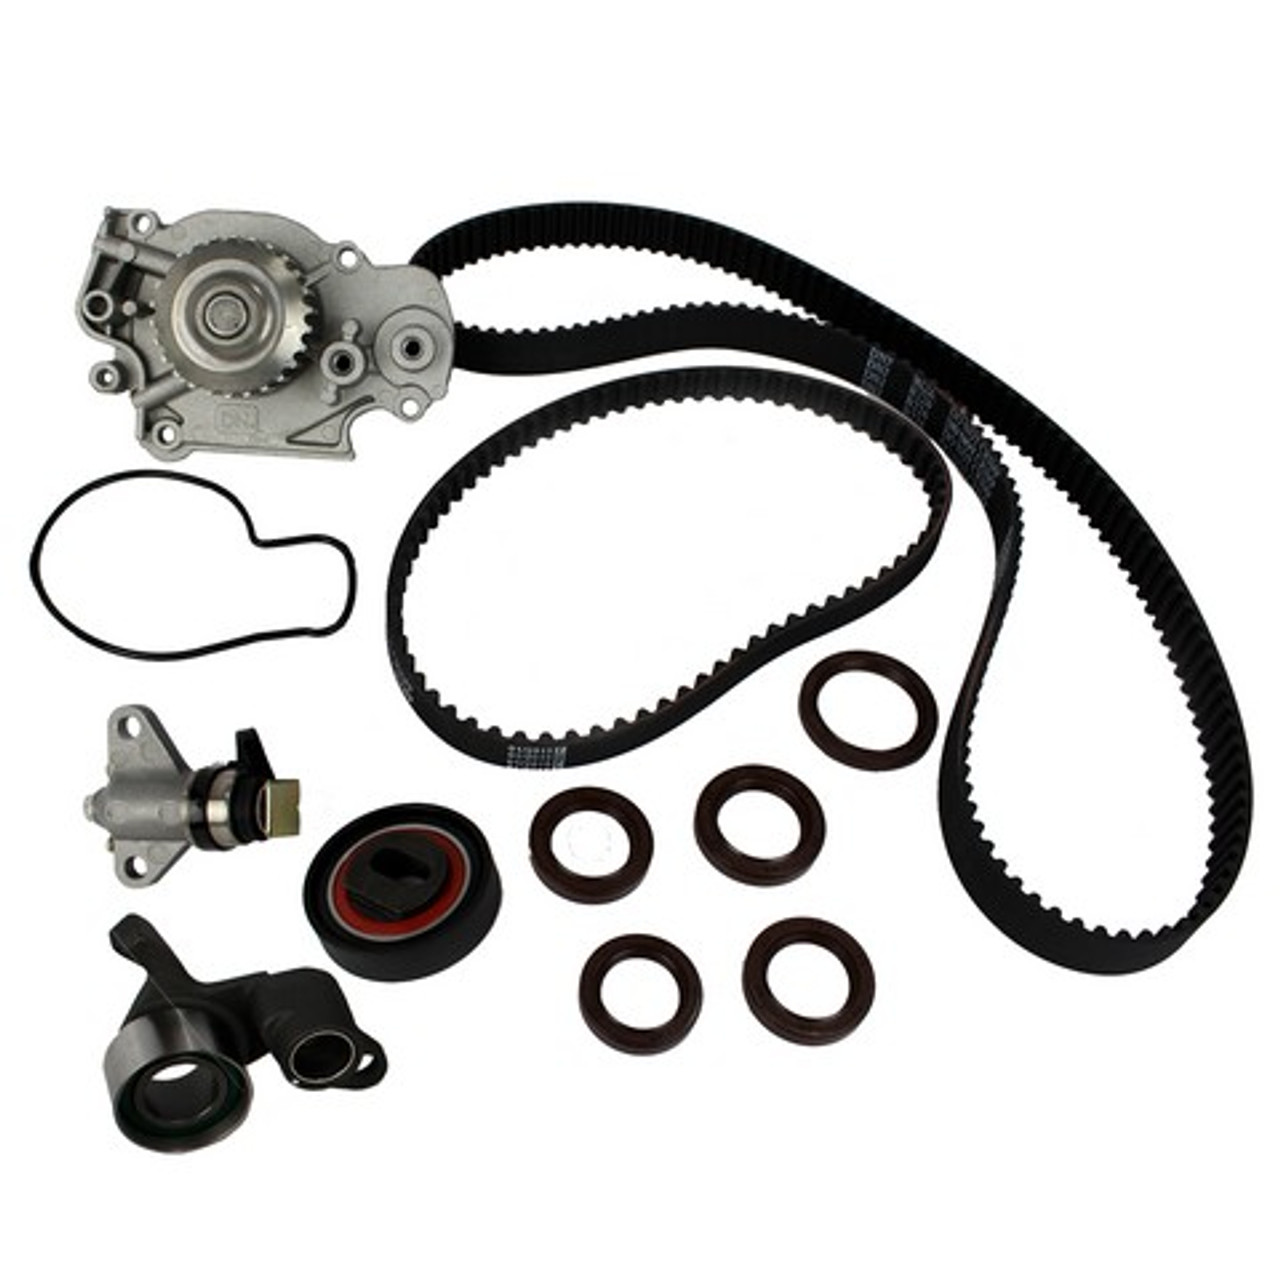 Timing Belt Kit with Water Pump 2.2L 1999 Honda Prelude - TBK223WP.7